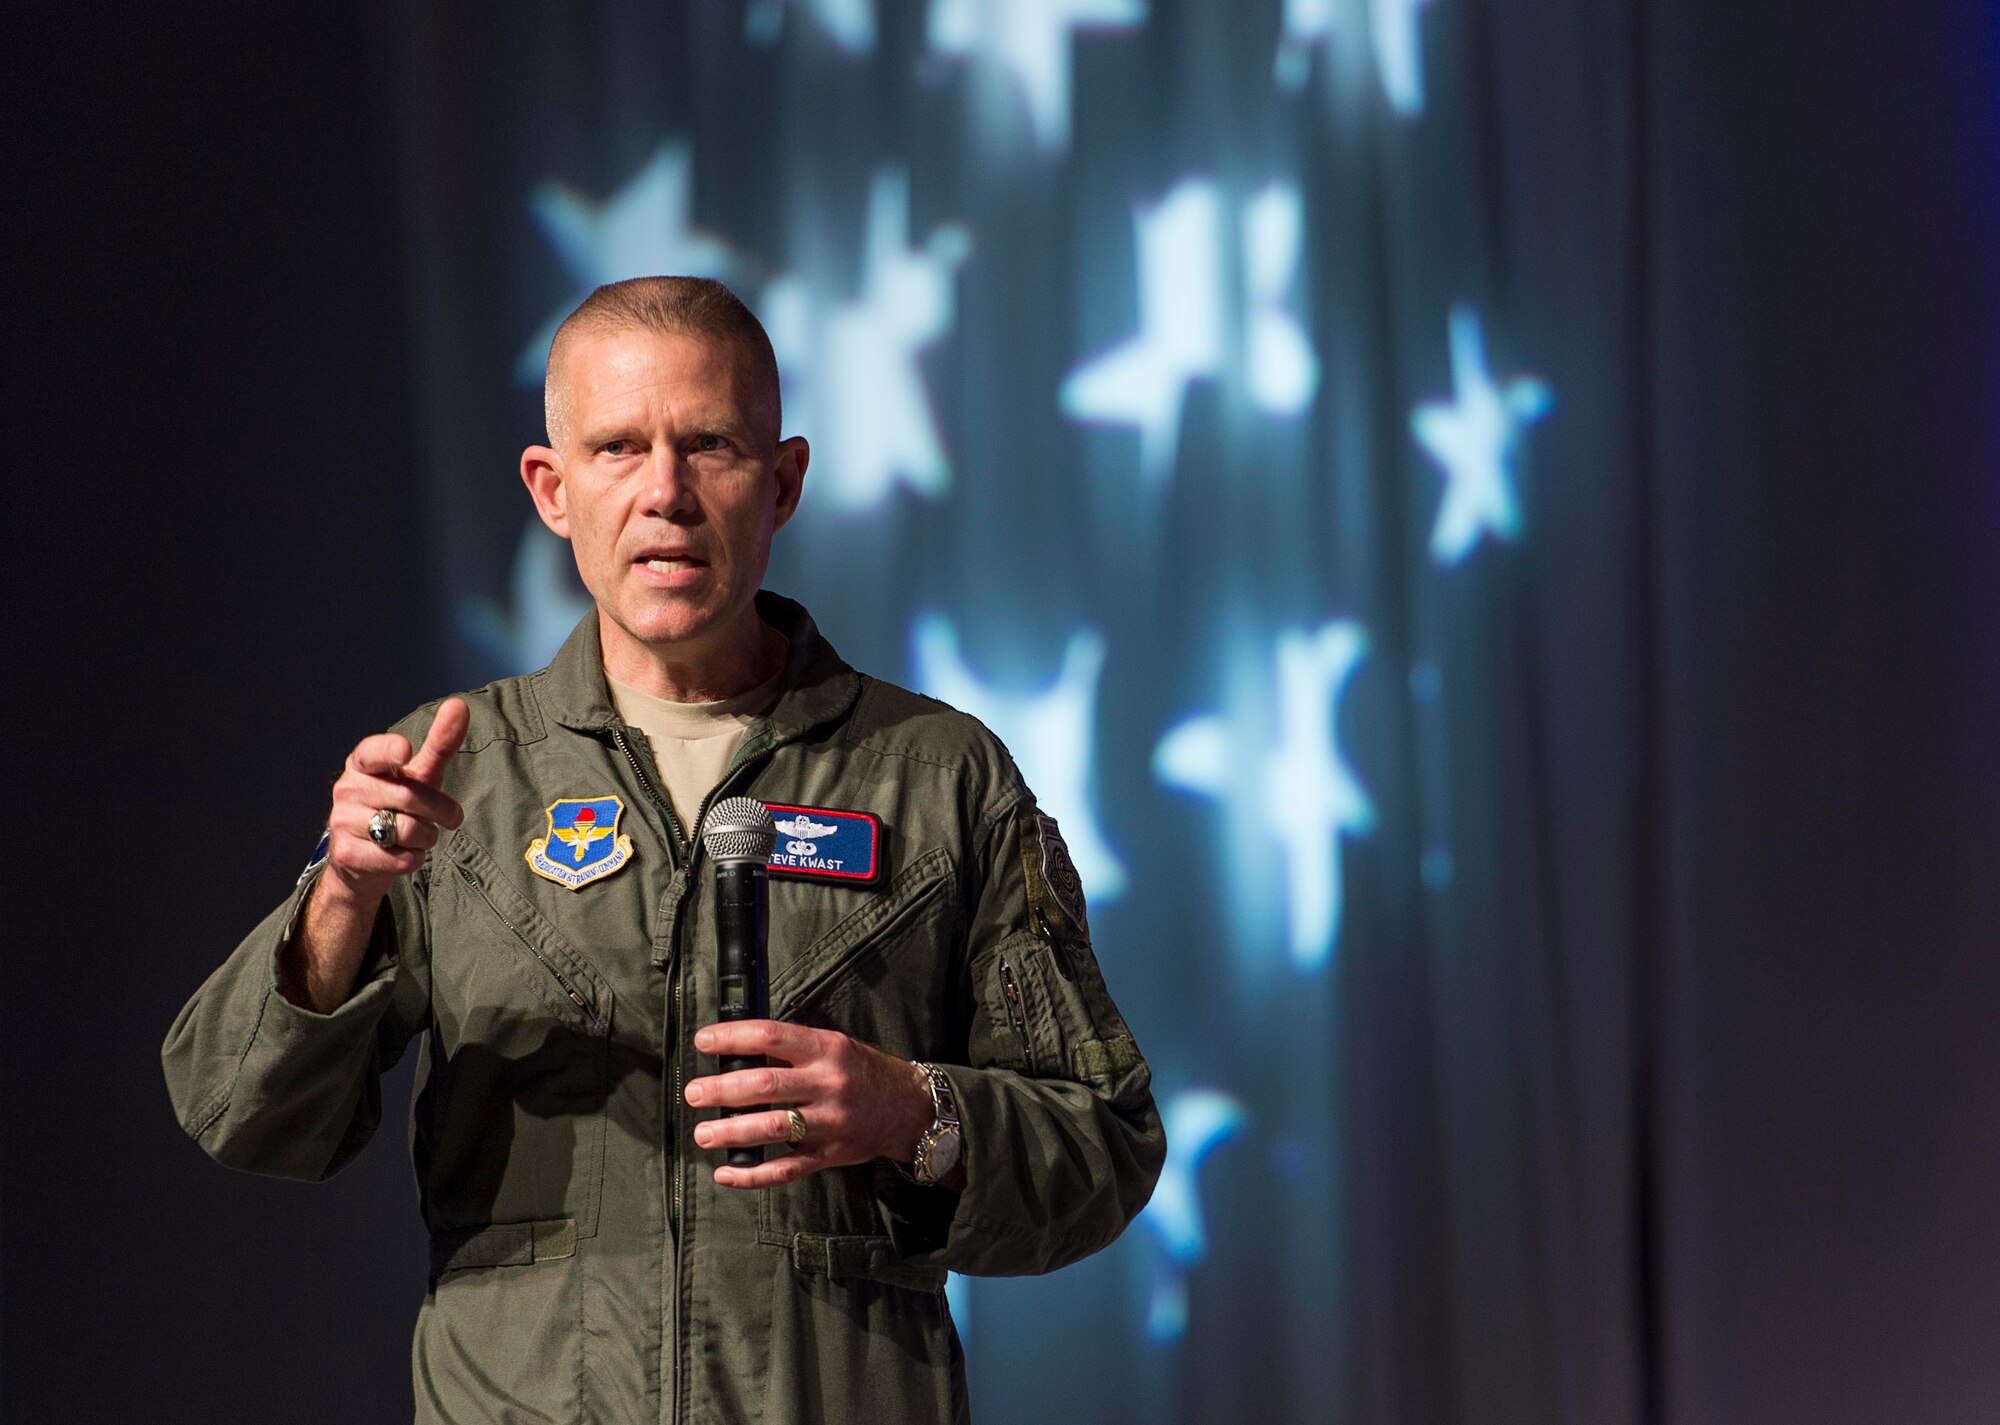 U.S. Air Force Lt. Gen. Steven Kwast, Commander of Air Education and Training Command, speaks to atendees of the 2018 Air Force Association Air Warfare Symposium in Orlando, Fla., Feb. 22, 2018. During his speech Lt. Gen. Kwast explained the importance of innovation for the future of the Air Force and how to develop innovators. (U.S. Air Force photo by Staff Sgt. Kenneth W. Norman)